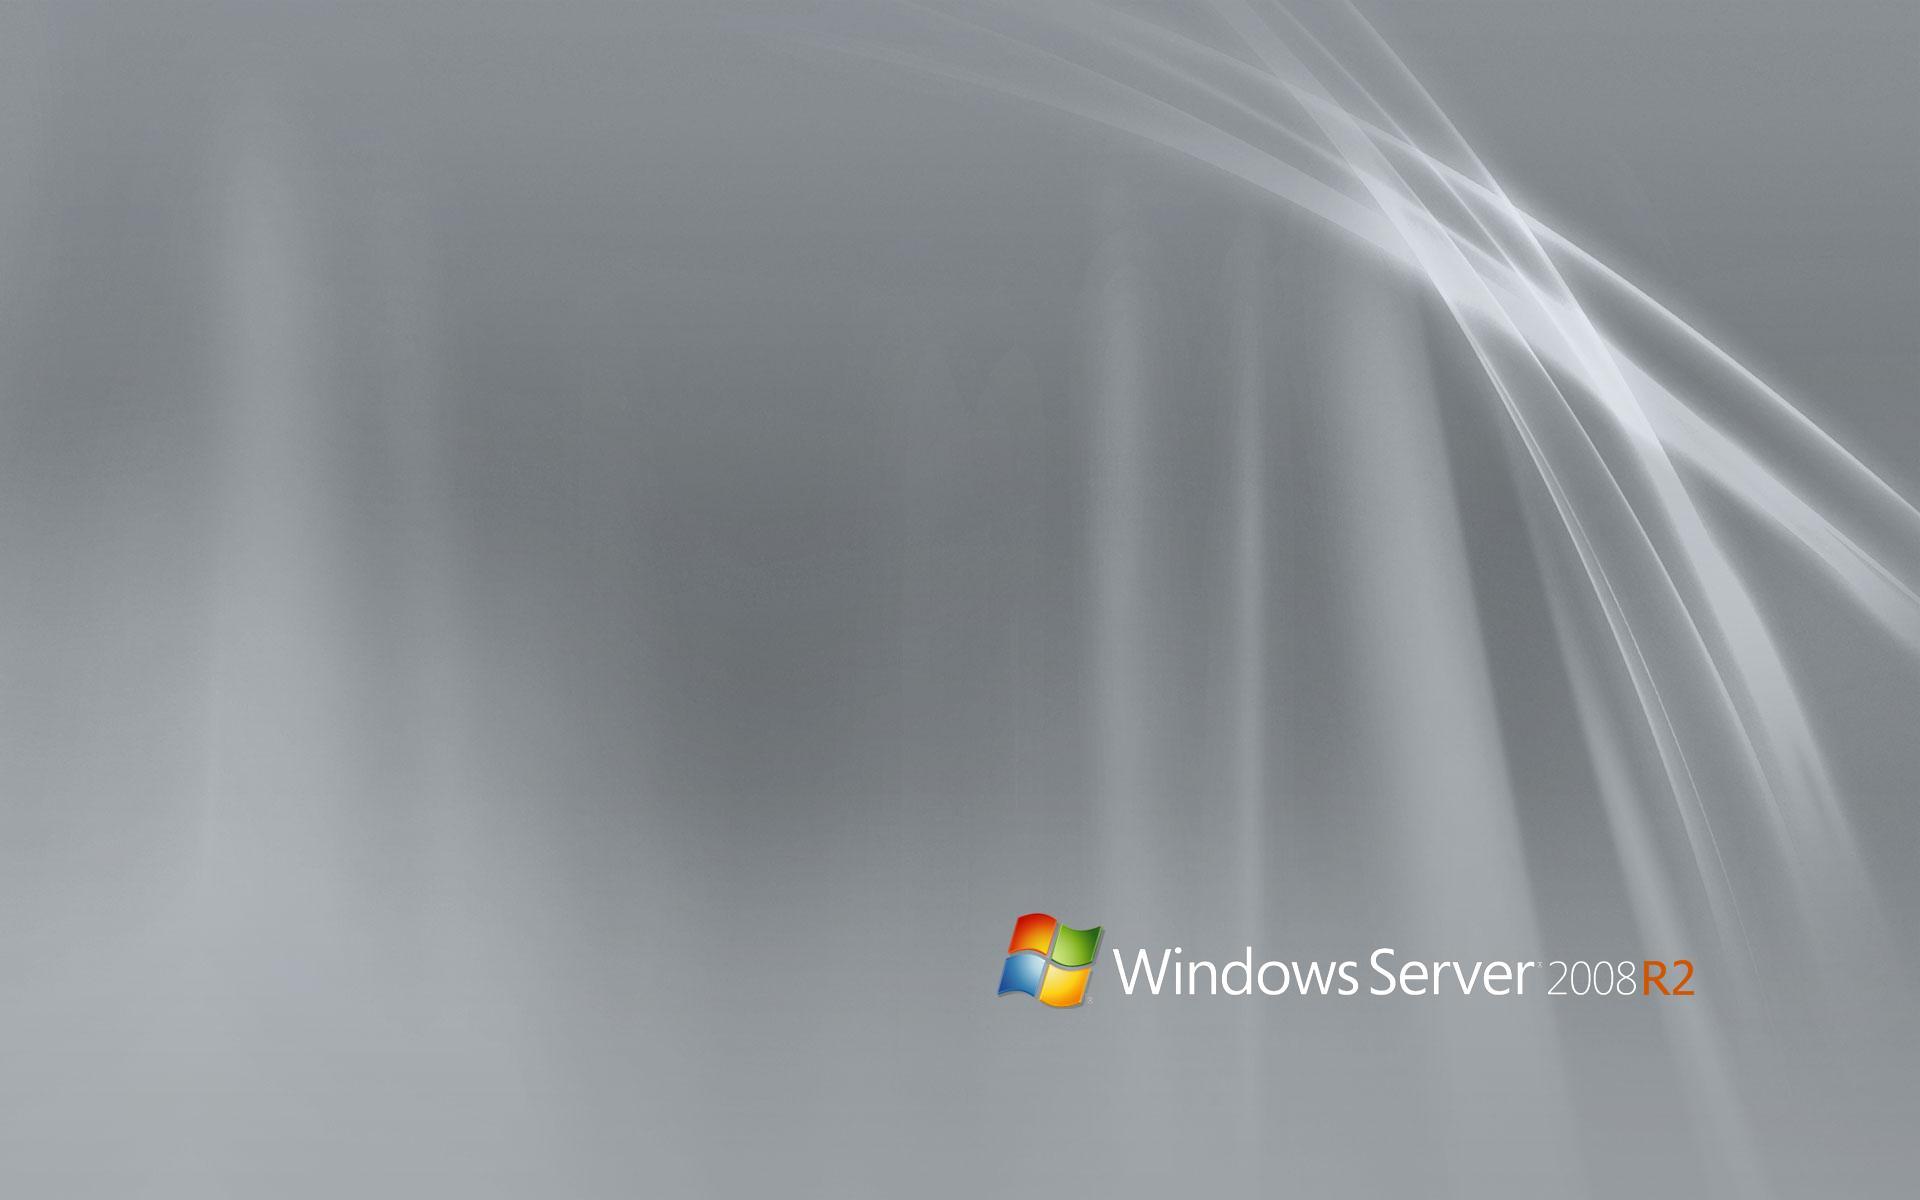 Pin Windows Server 2008 R2 System Properties By Amitie2015